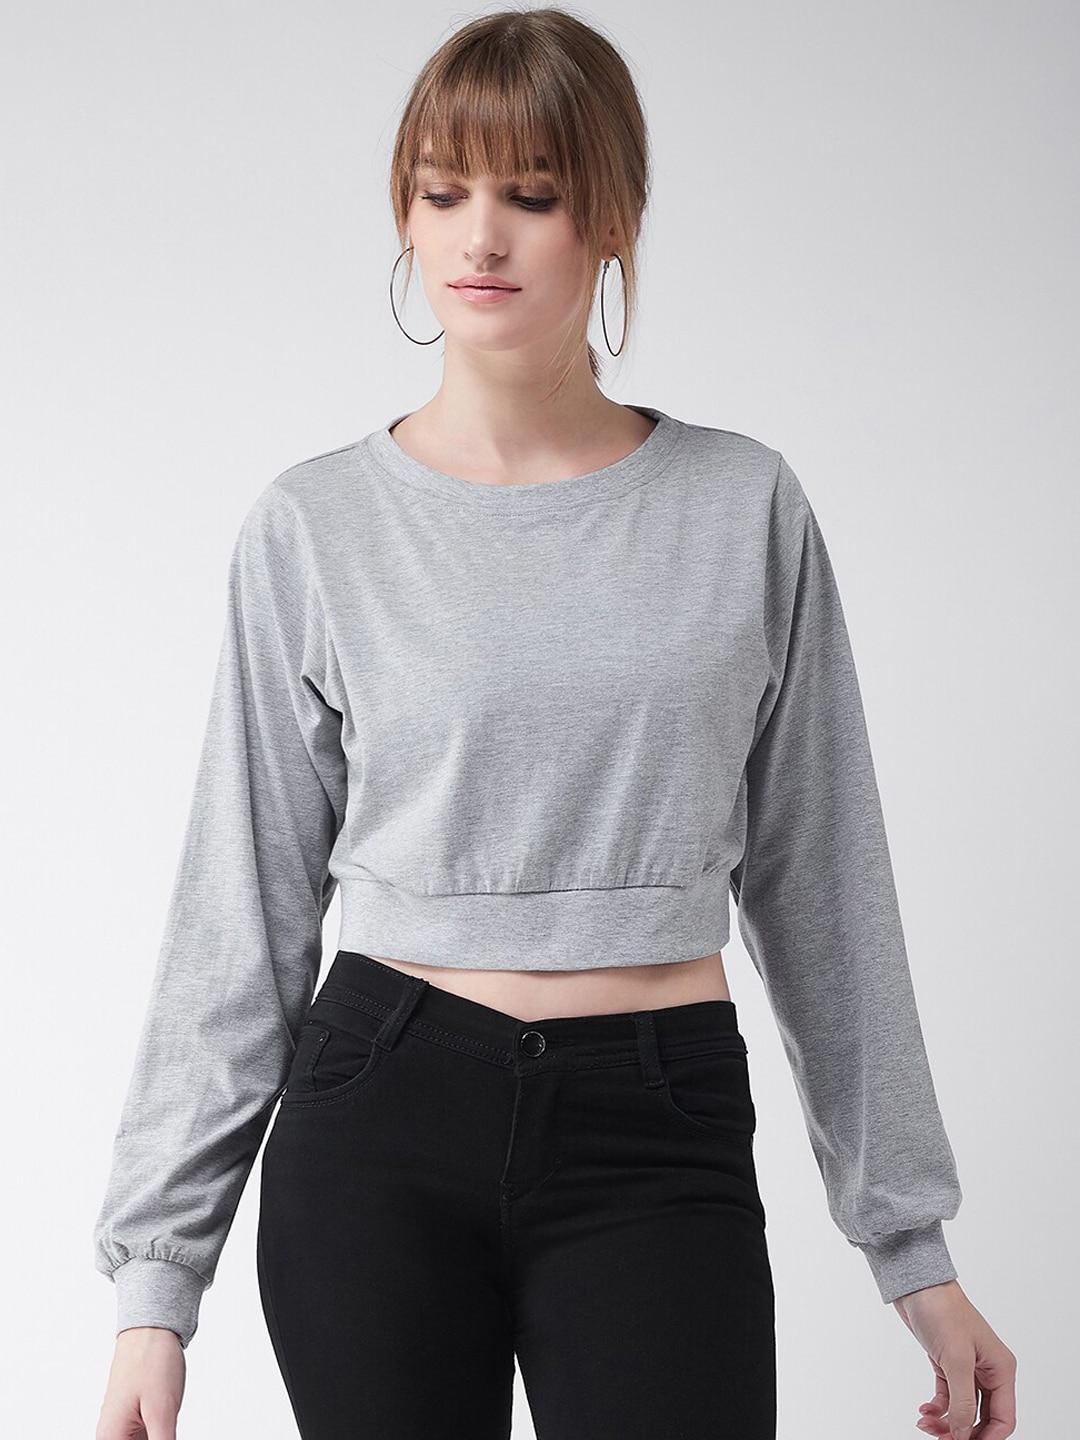 miss-chase-women-grey-solid-top